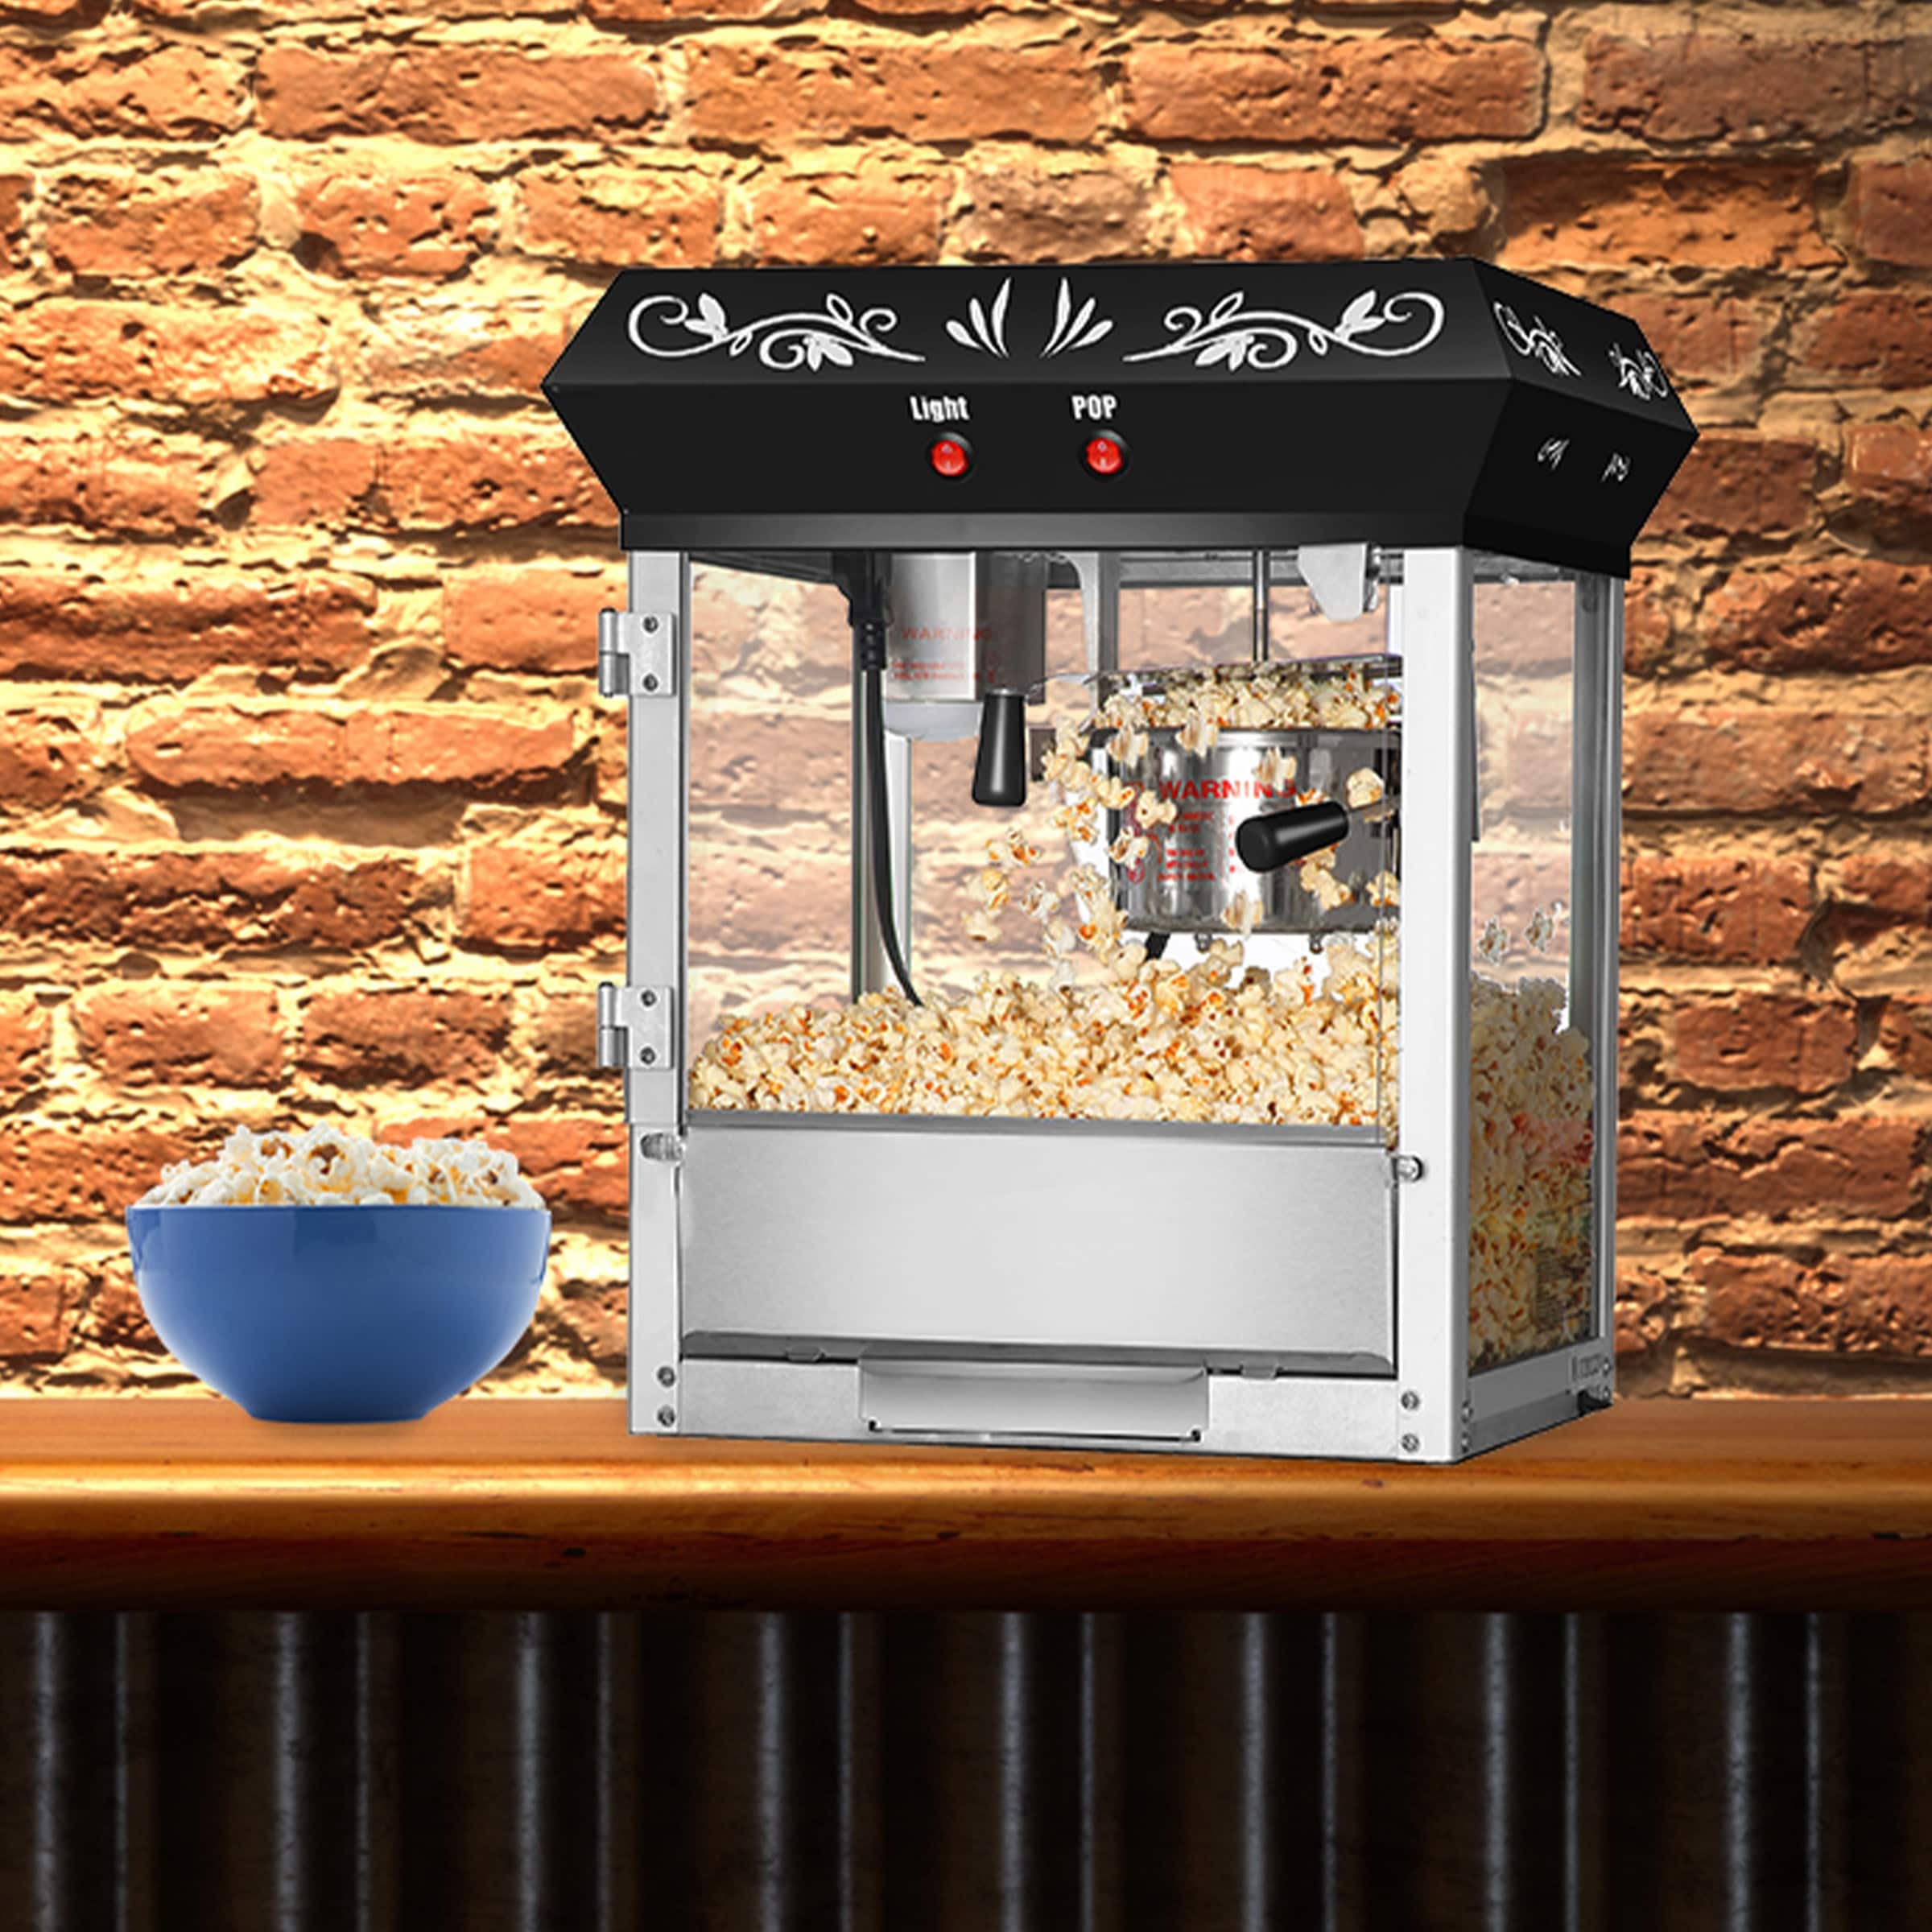 https://ak1.ostkcdn.com/images/products/is/images/direct/ac0d8d74663030b050bf2e33f3ec4a2685981527/Foundation-Countertop-Popcorn-Machine-and-12-All-In-One-Popcorn-Packs-by-Great-Northern-Popcorn-%28Black%29.jpg